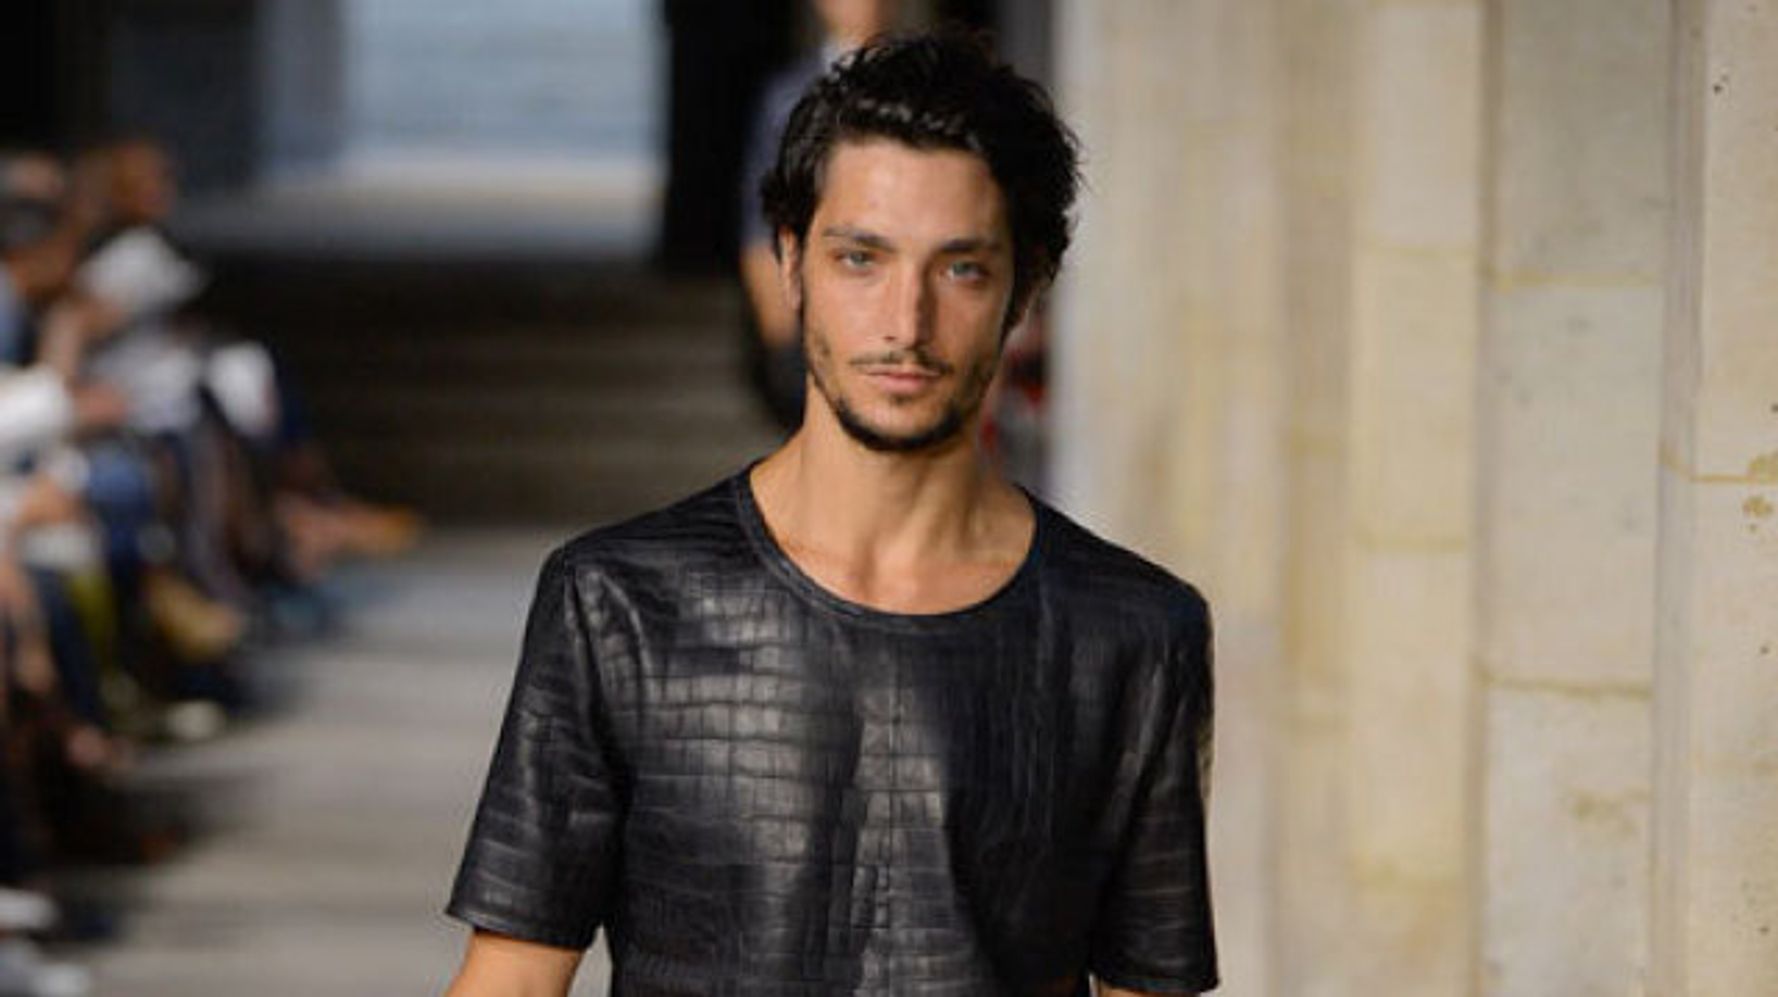 91,500 dollars for a T-SHIRT? A look at the Hermes garment that